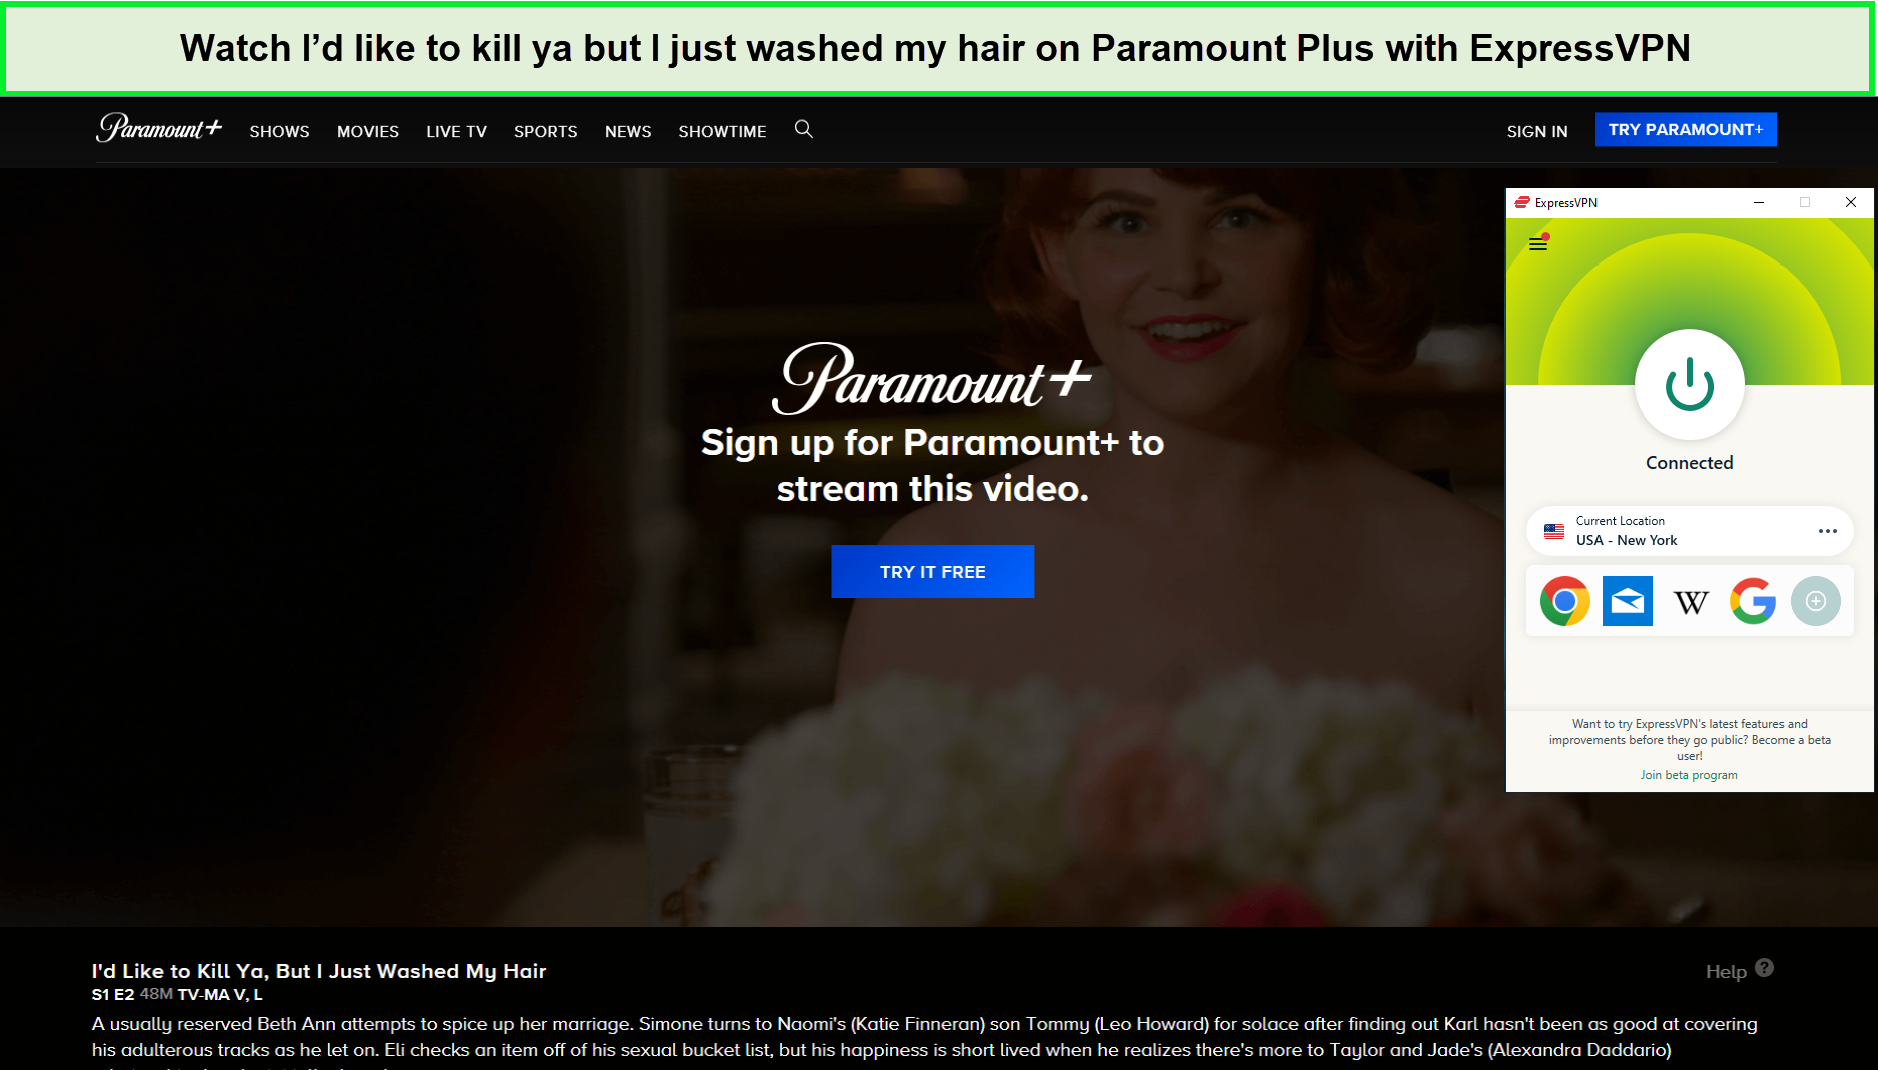 Watch-Id-like-to-kill-ya-but-I-just-washed-my-hair-in-UAEon-Paramount-Plus-with-ExpressVPN